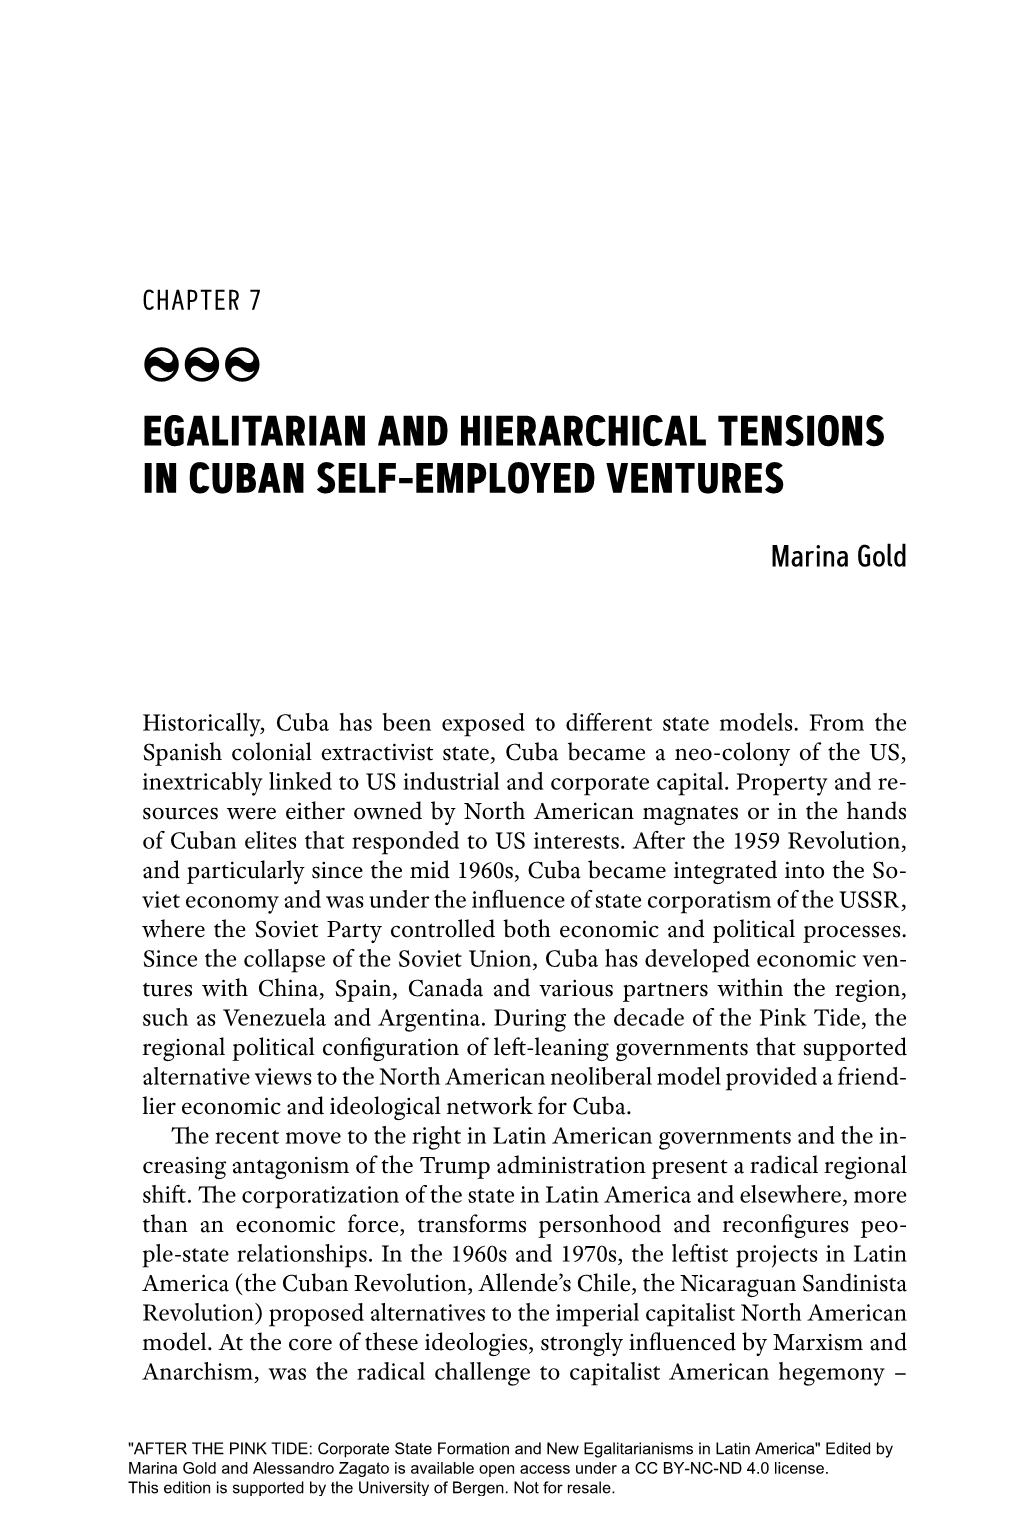 Chapter 7. Egalitarian and Hierarchical Tensions in Cuban Self-Employed Ventures